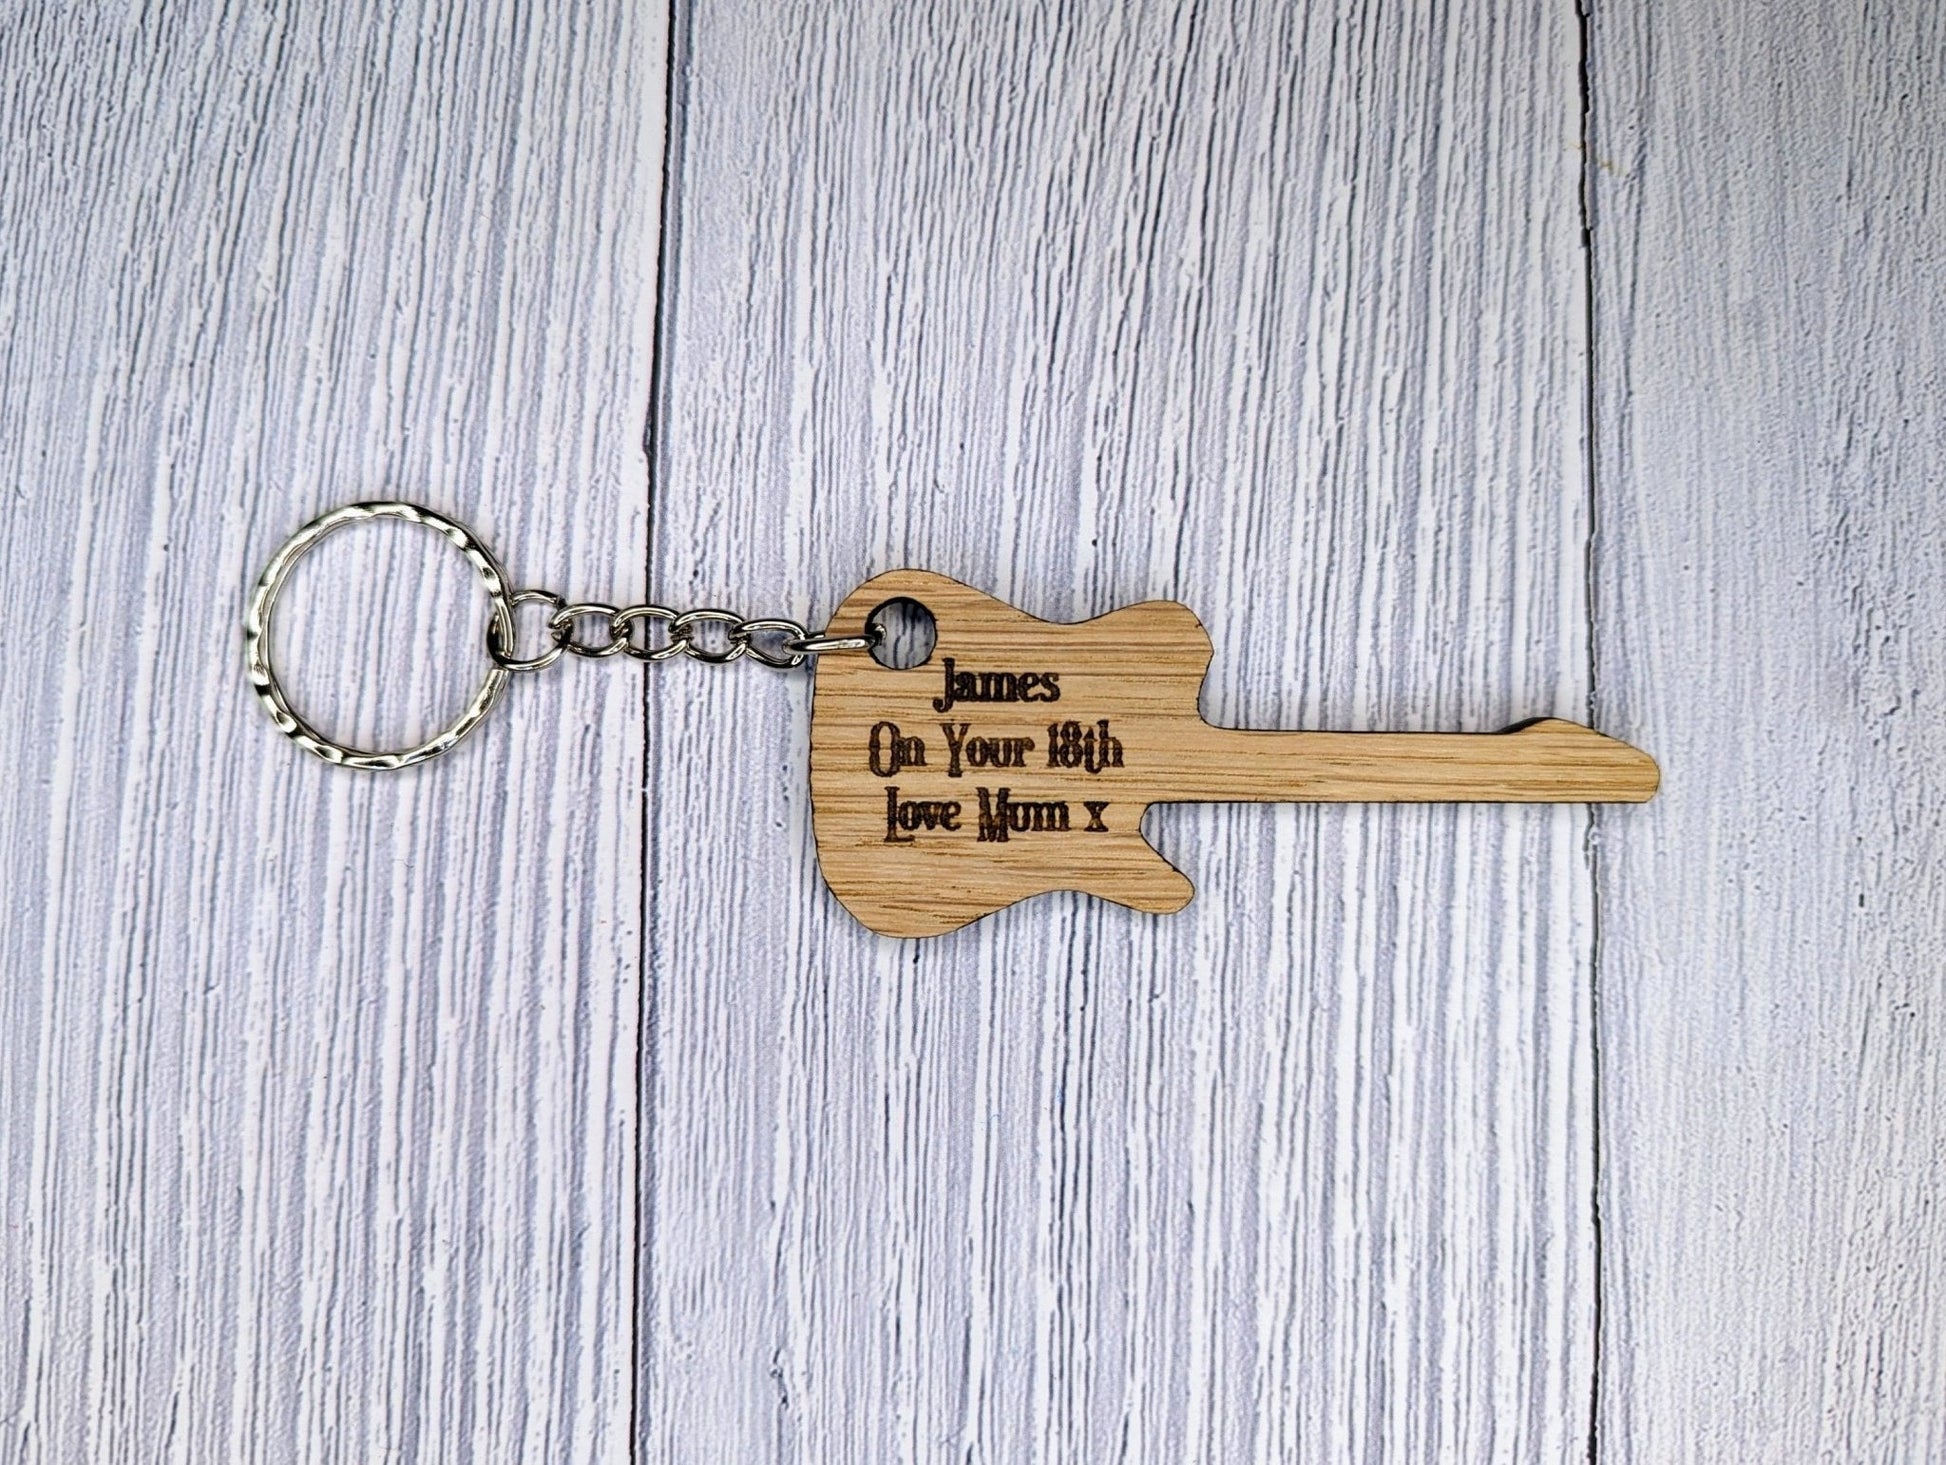 Custom Wooden Guitar Keyrings - Acoustic & Electric - Personalised Music Gift - Bag Charm - Bag Tag - CherryGroveCraft